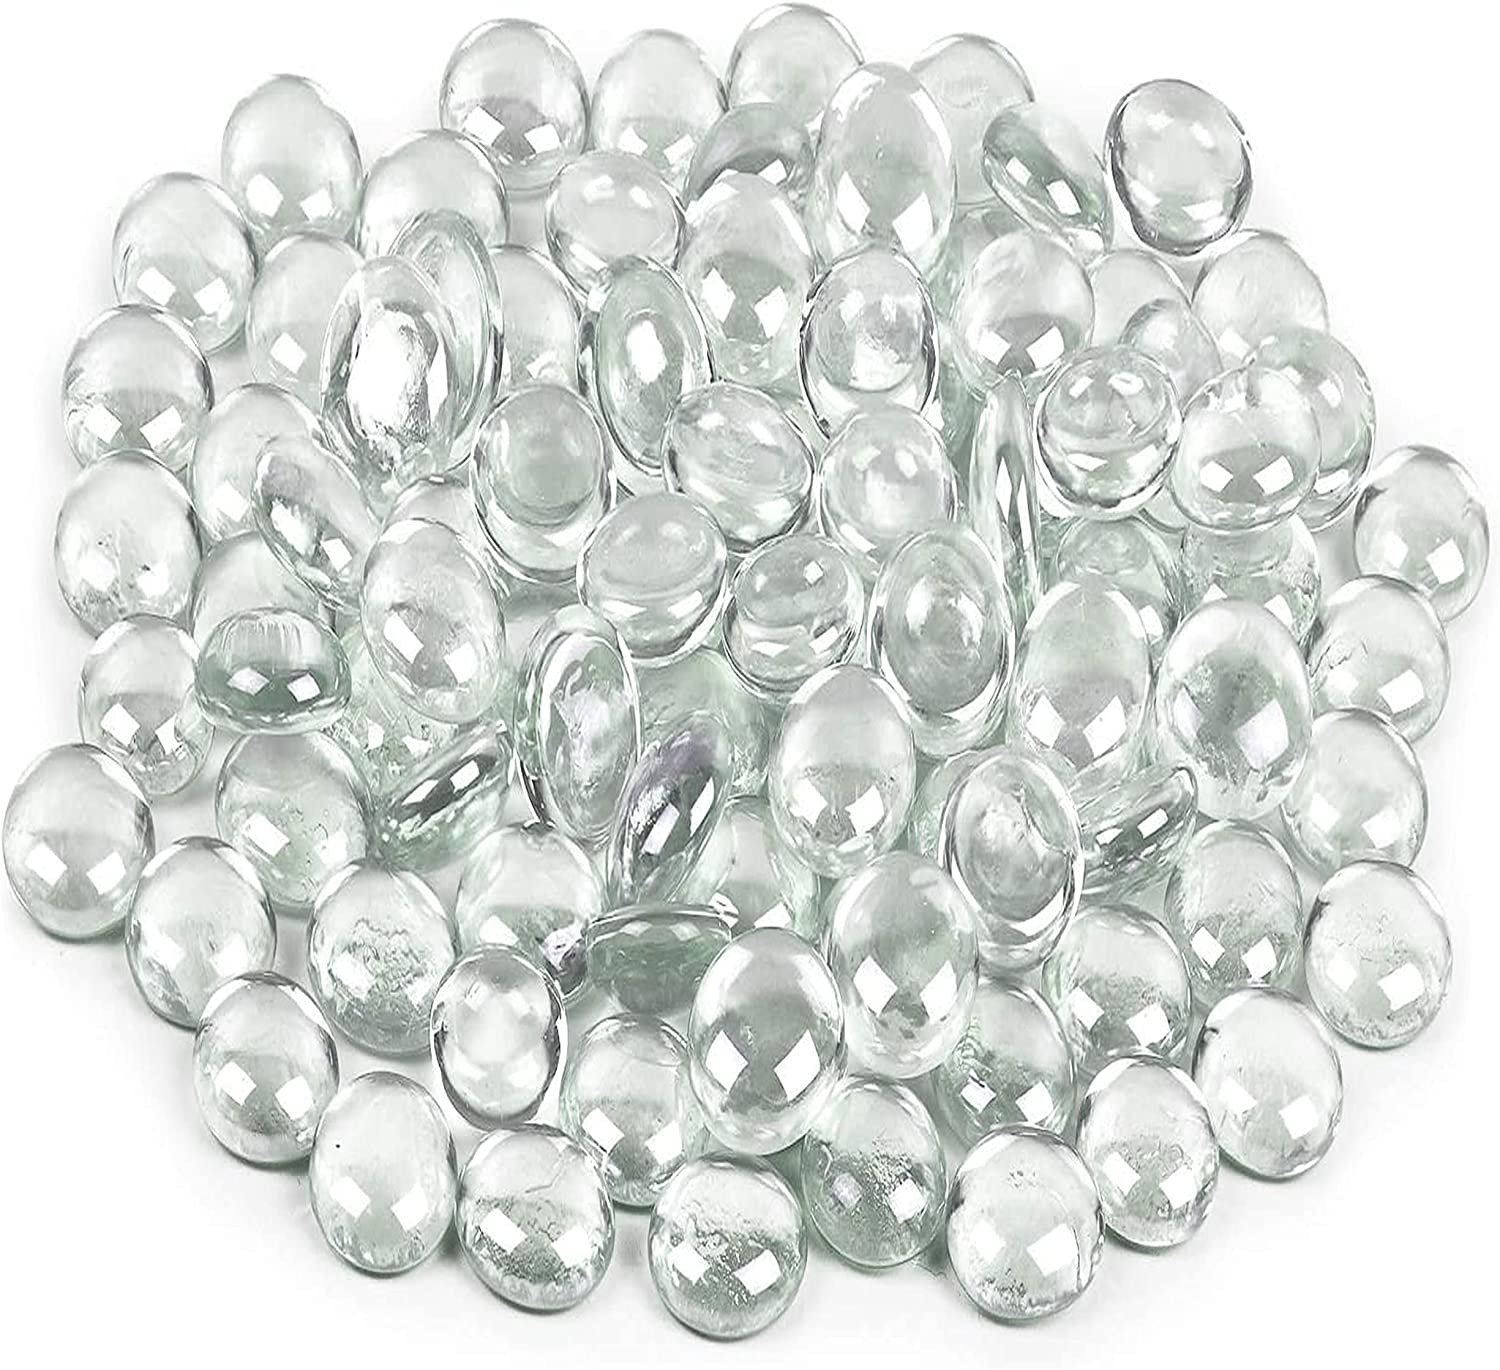 Galashield Clear Flat Glass Marbles for Vases Glass Gems Beads Pebbles Vase Filler 5 lbs, Approx. 450 Pcs - image 1 of 6